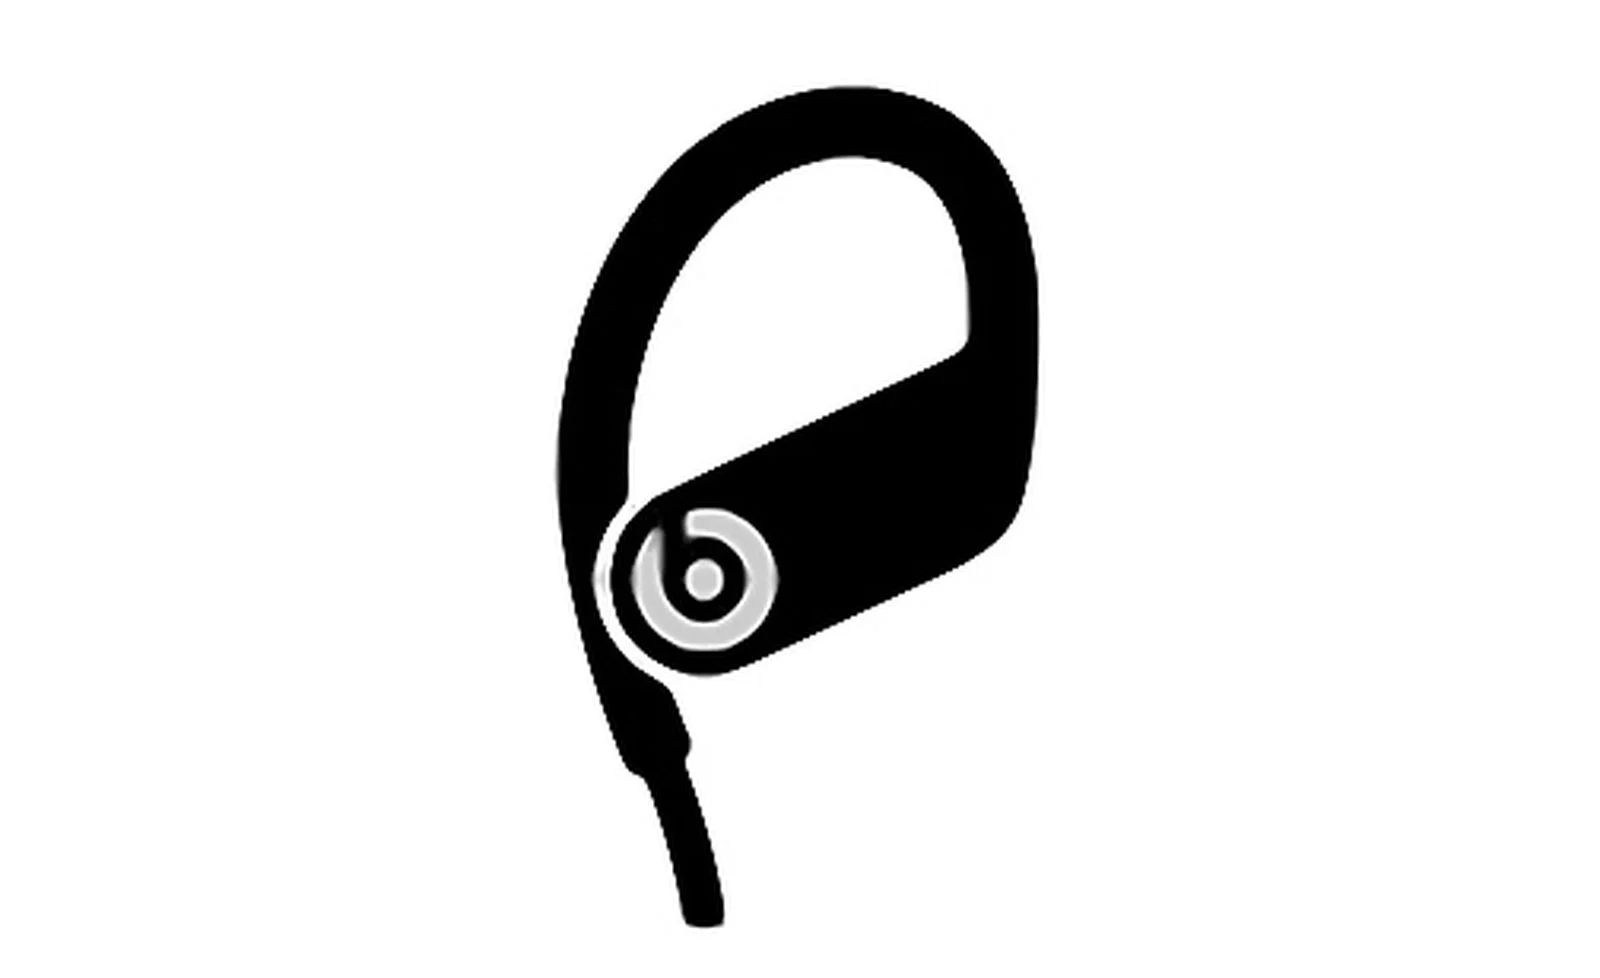 Apple leak reveals new Powerbeats earbuds might be coming